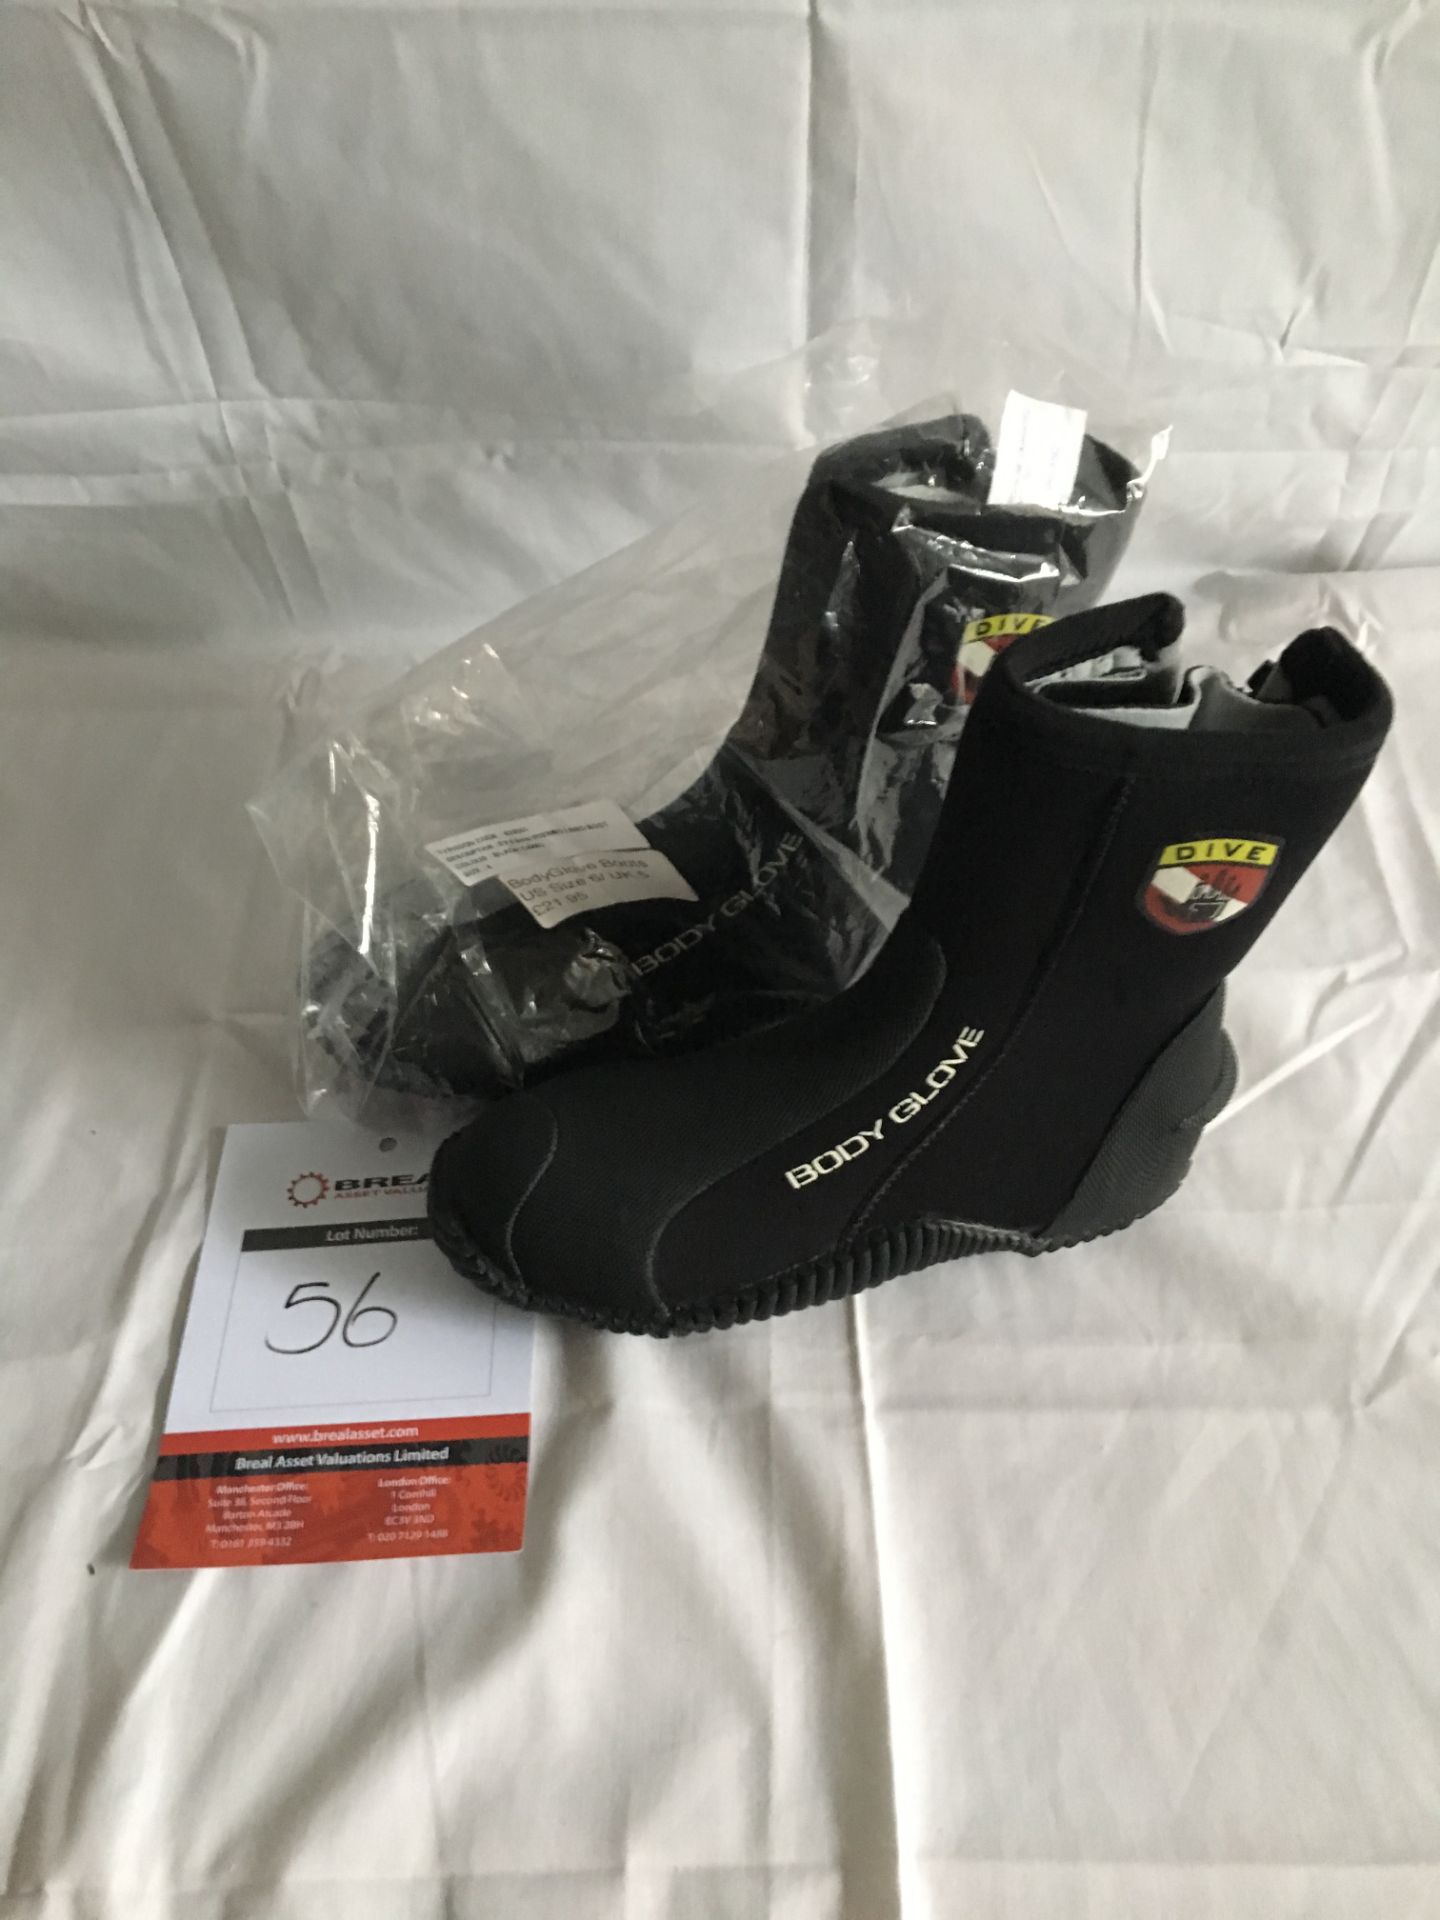 Pair of Body Glove EX 6.5mm Thermo Lined Boots in black camo, size 5 (new)